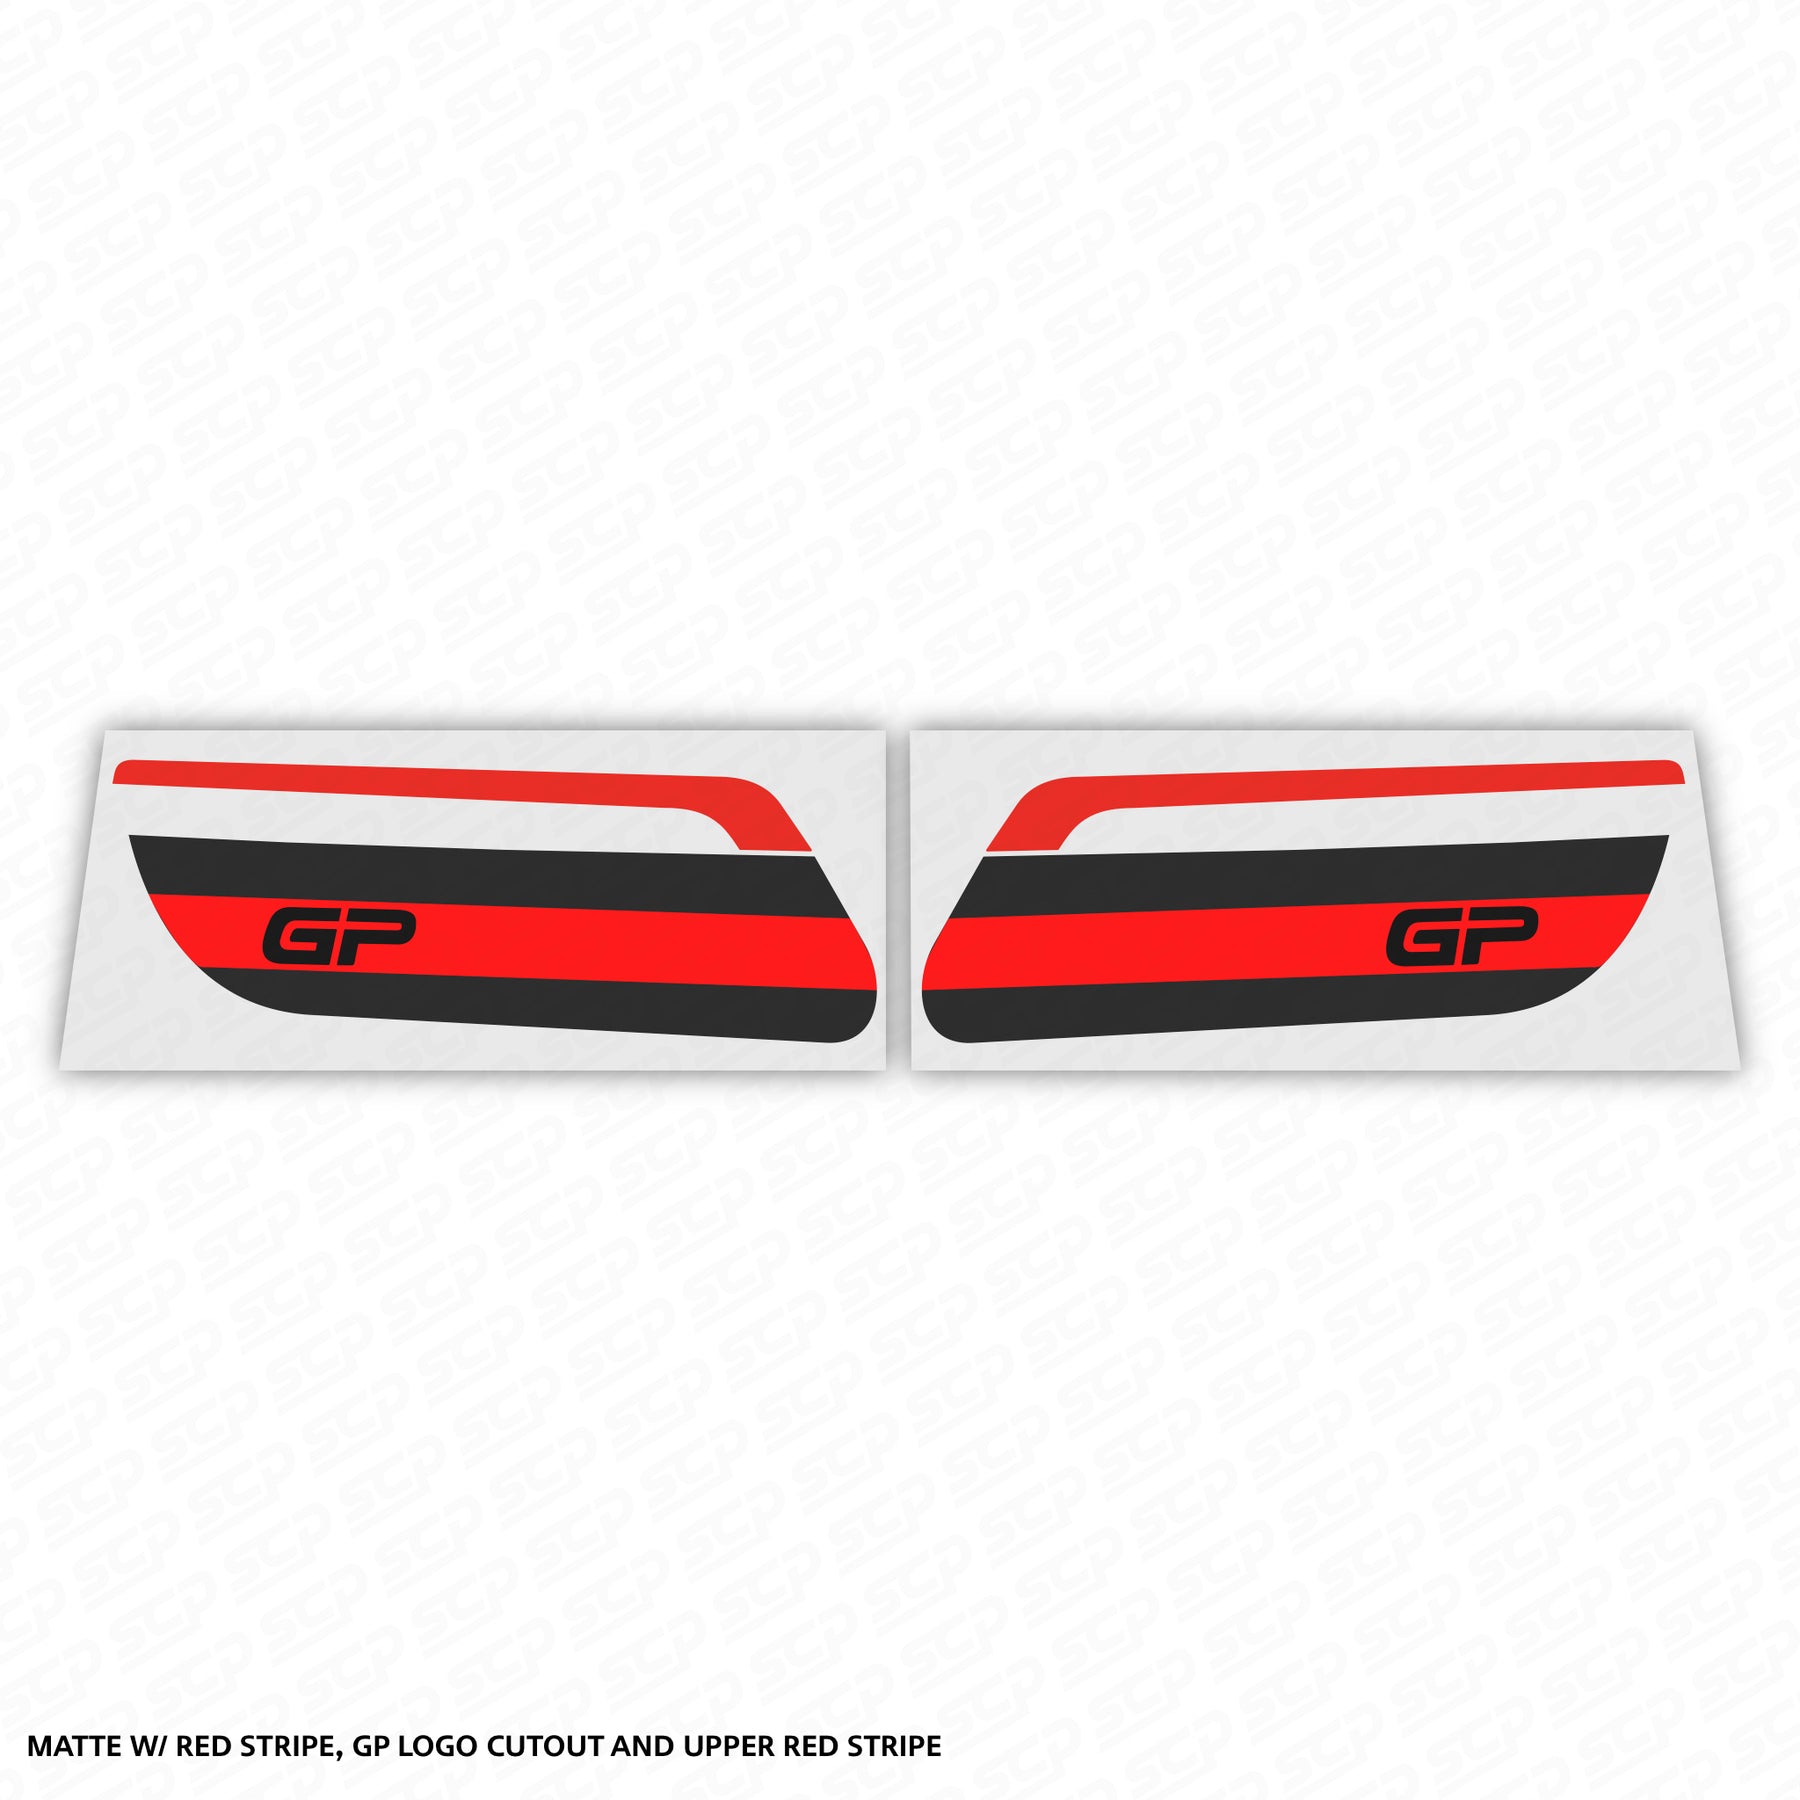 MINI F-Series LCI 2 Dynamic Sequential Indicator Faceplate Decal - GP